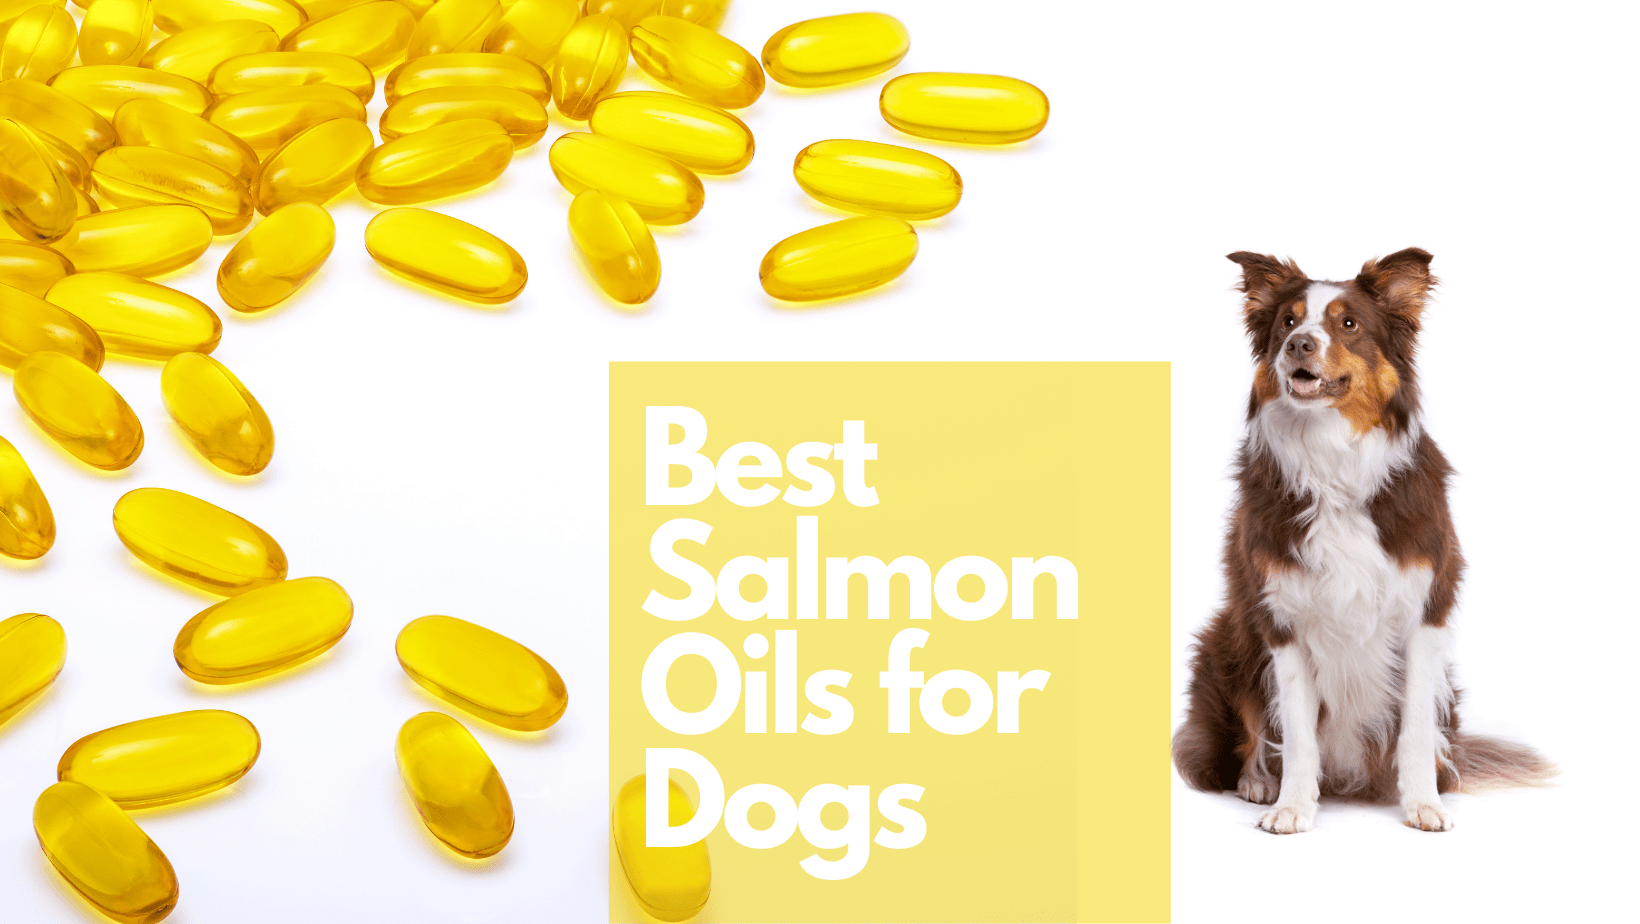 Best Salmon Oils for Dogs